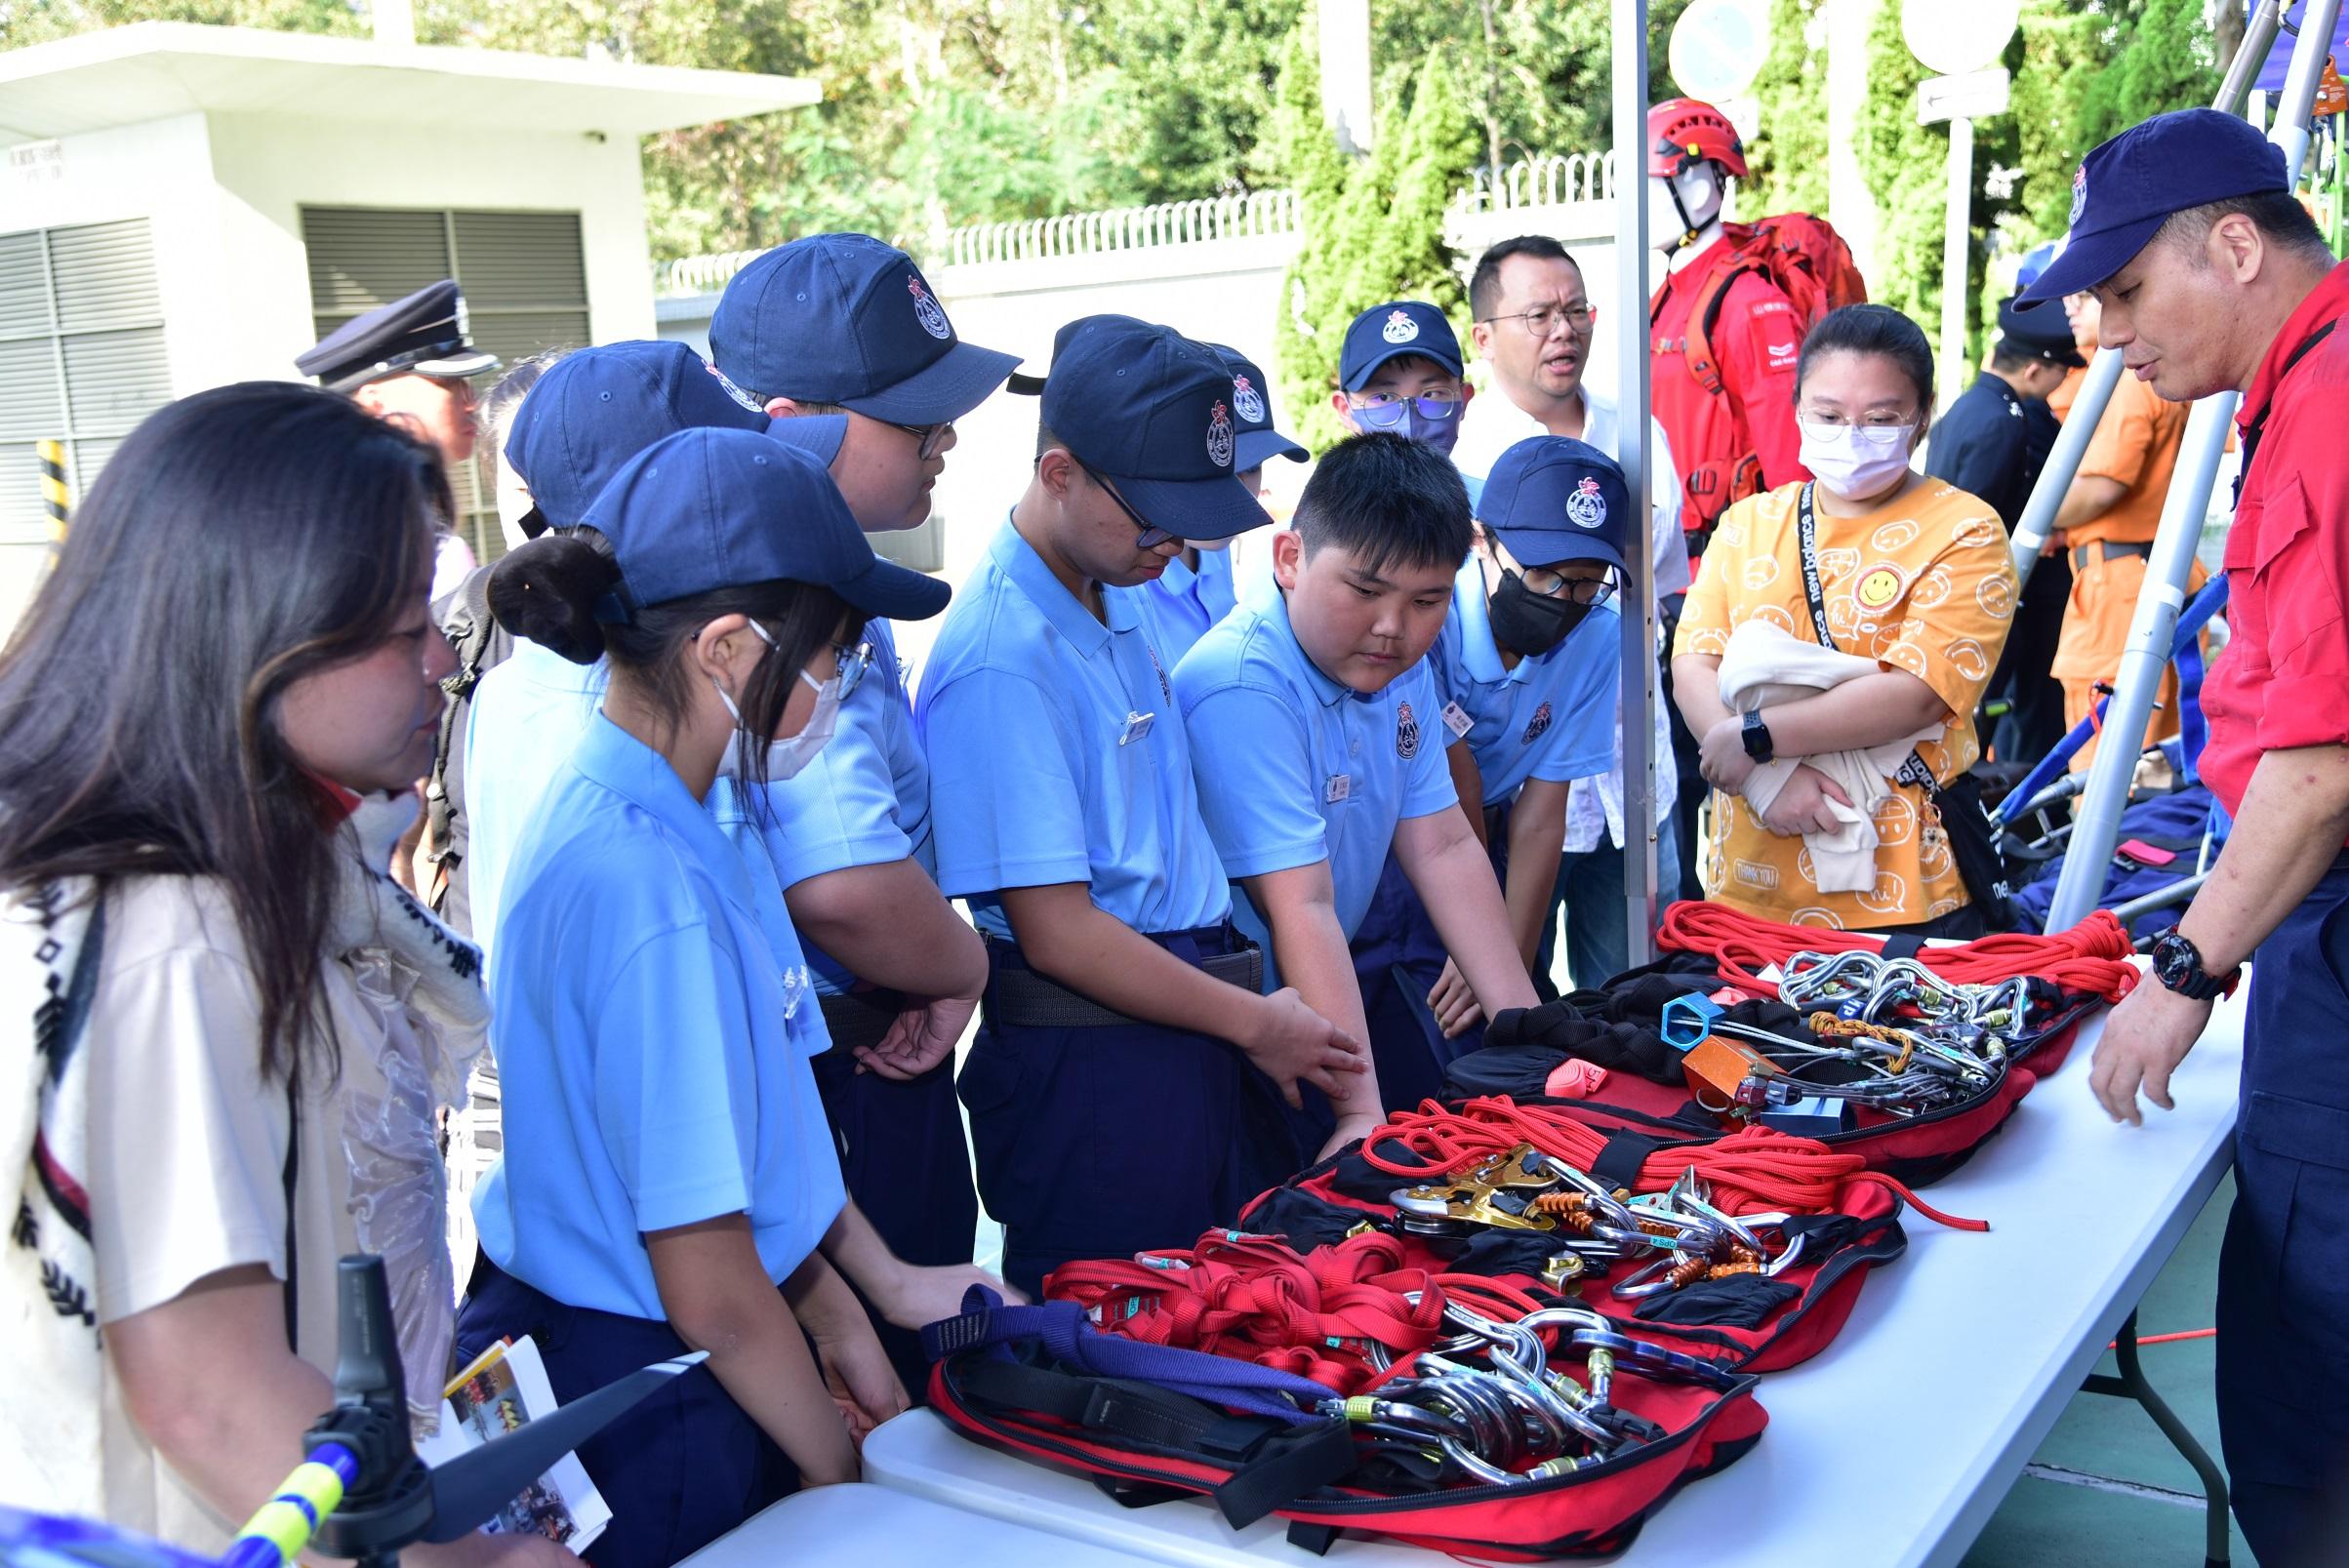 The Civil Aid Service Cadet Corps held the 139th New Cadets Passing-out Parade today (November 25). Photo shows members of the public viewing the rescue and training equipment displayed at the venue.